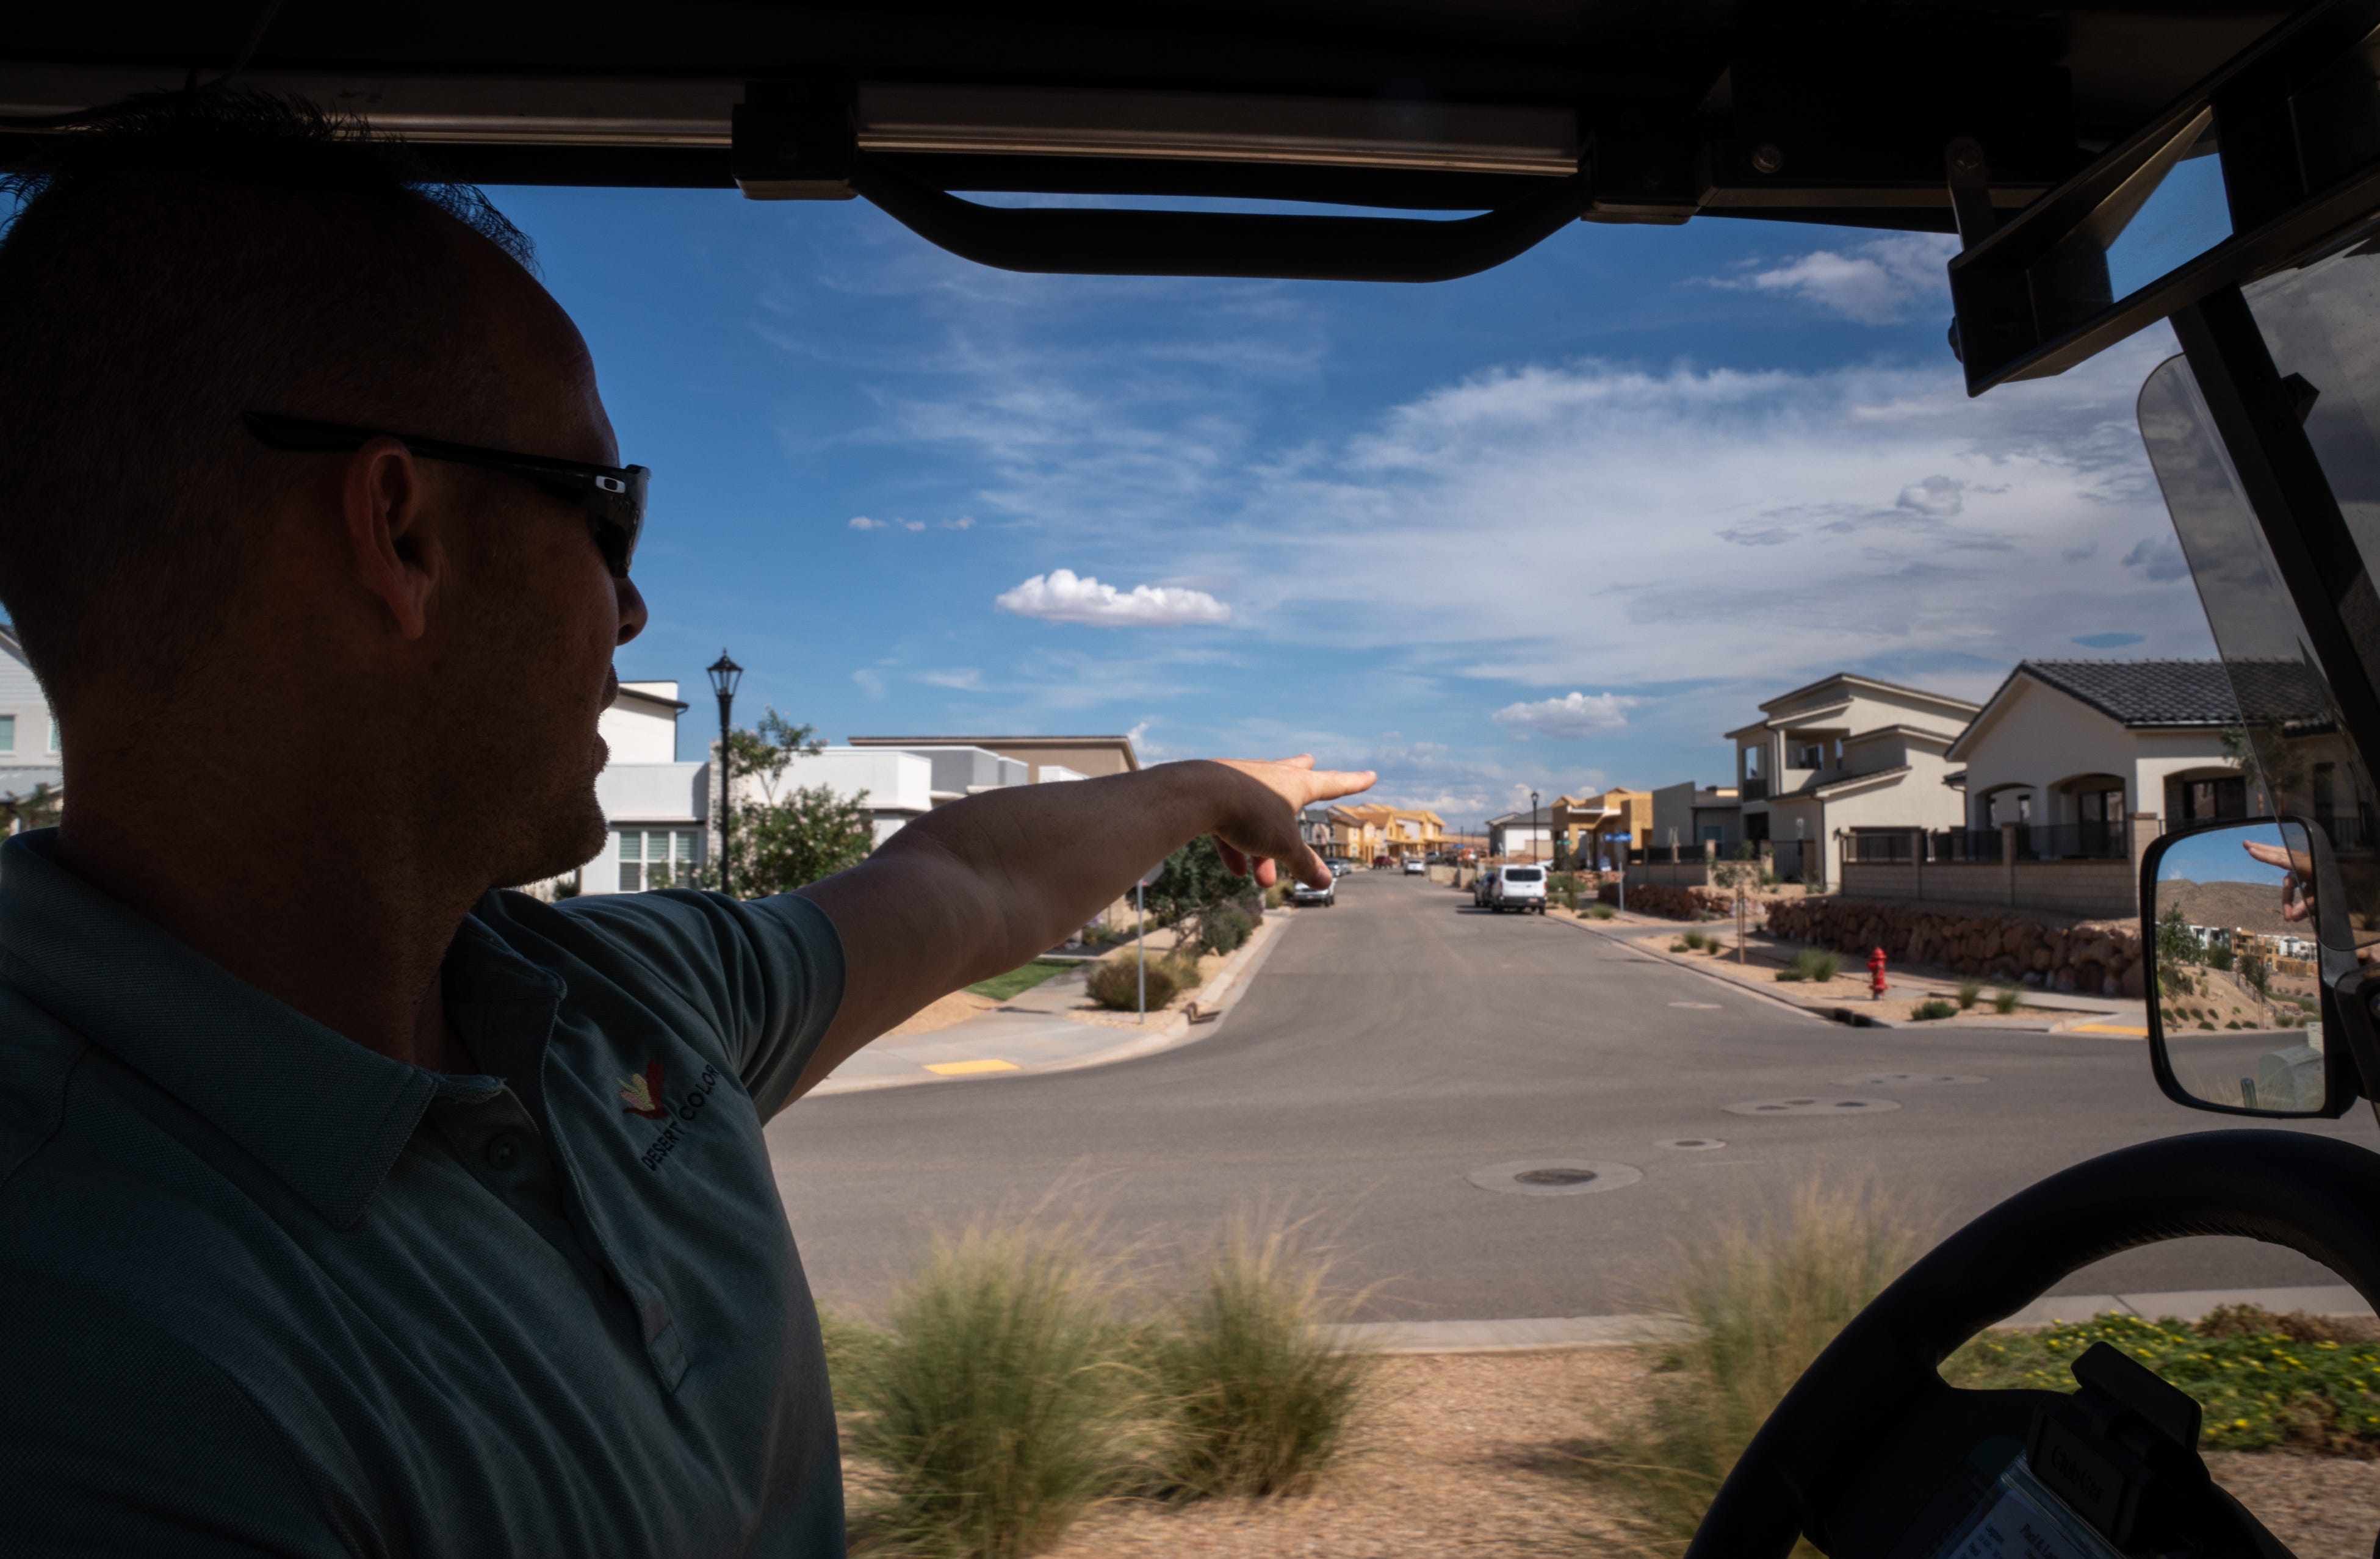 Ryan Coates gives a tour of the Desert Color community in St. George, Utah, on Sept. 27, 2022. The new community has put an emphasis on conserving water with its landscaping and by reusing water.